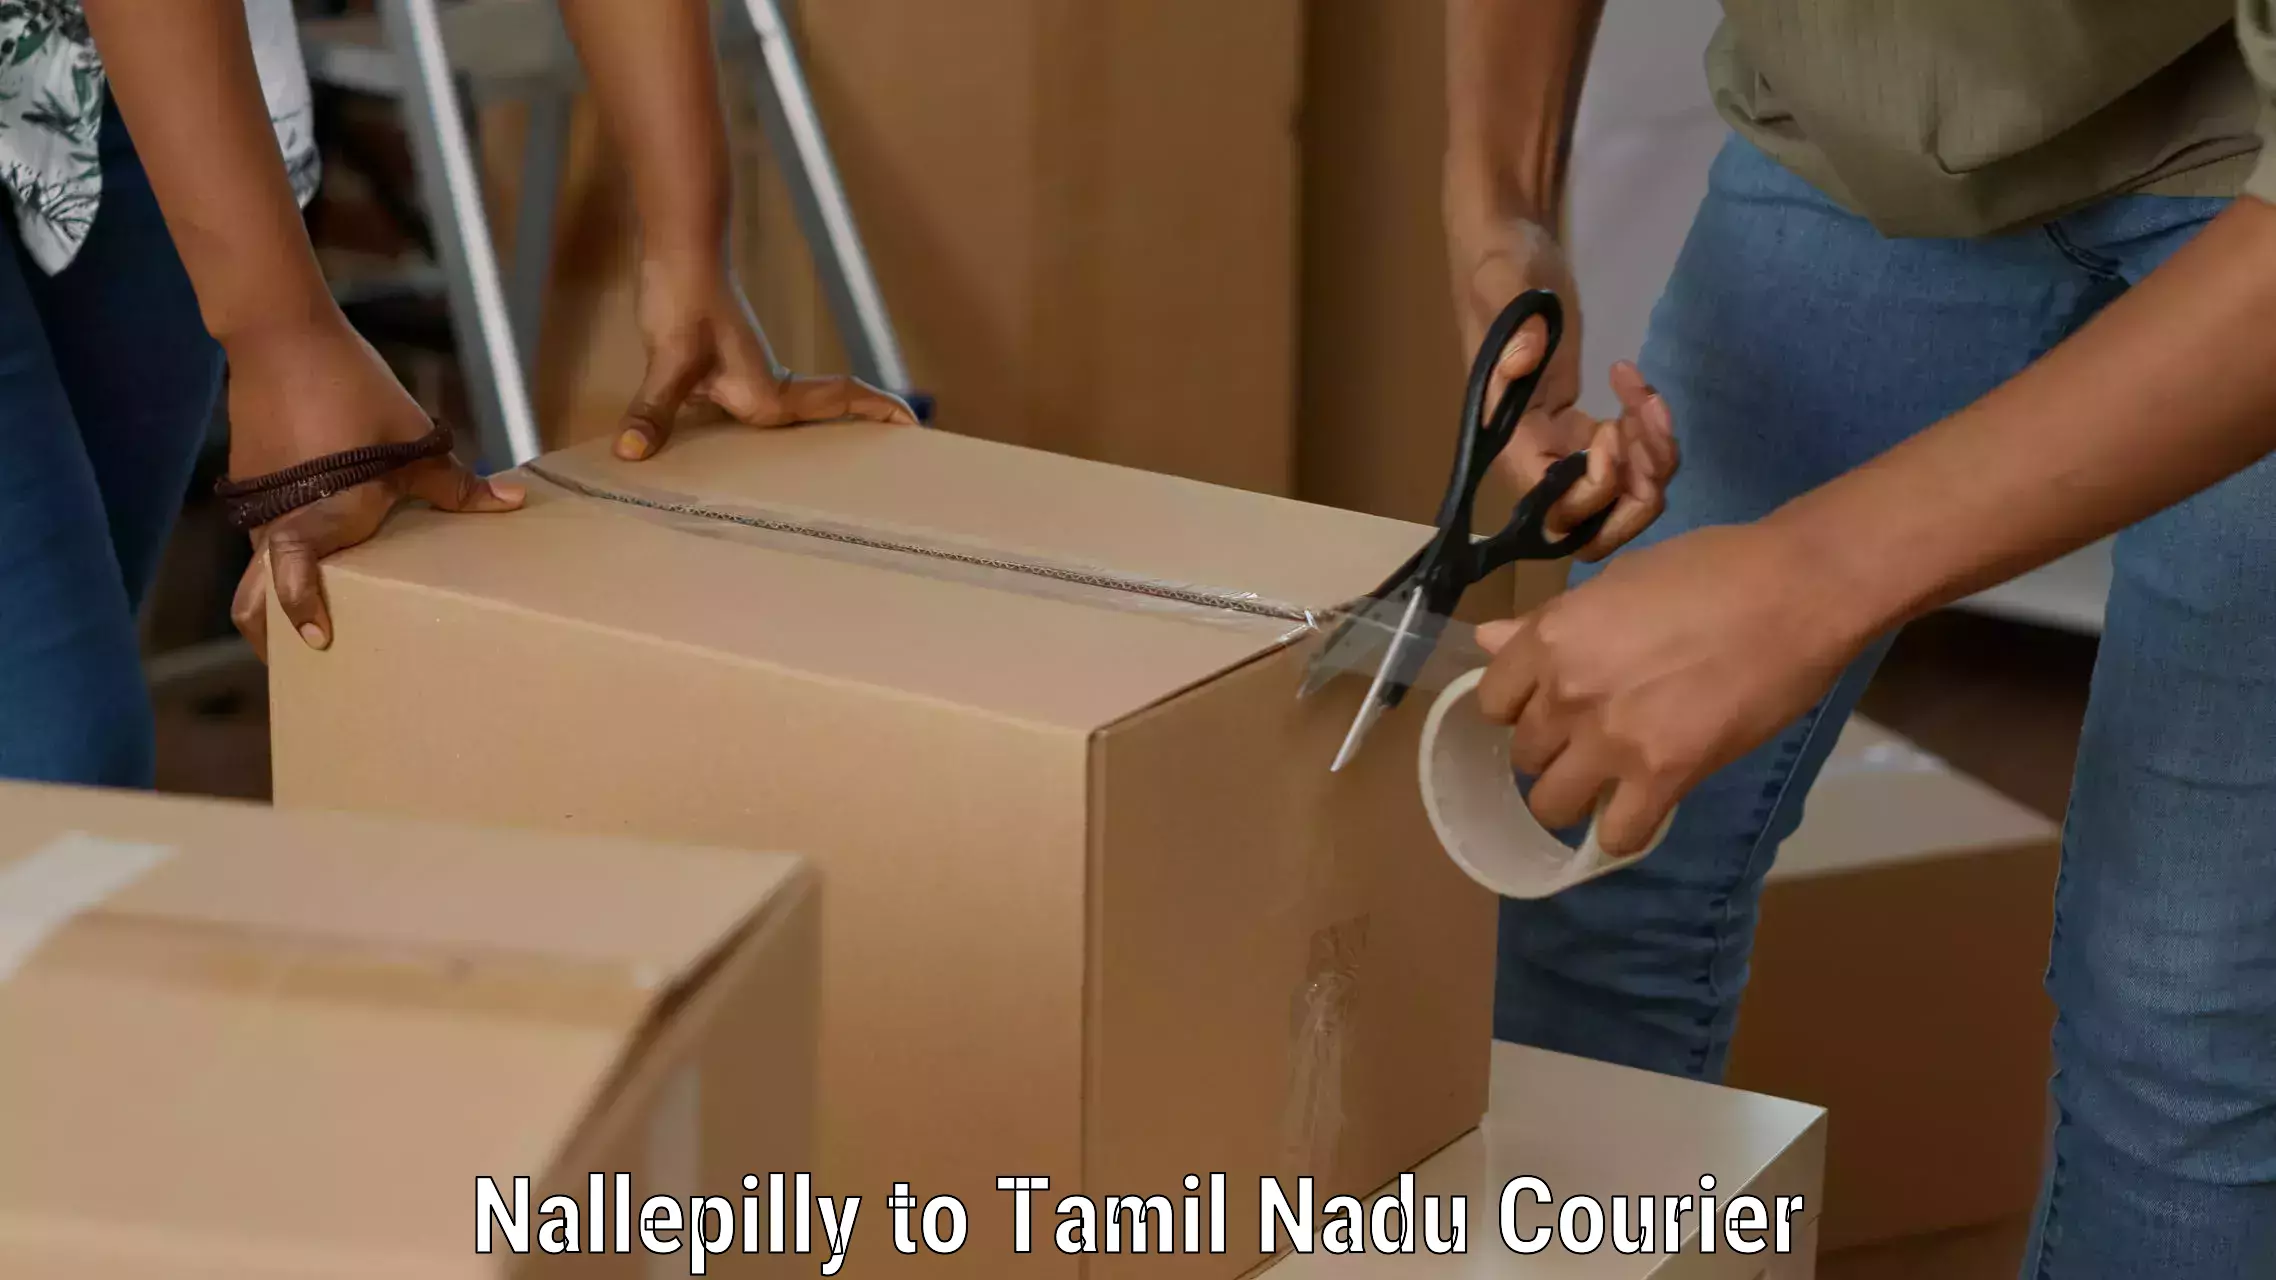 24/7 courier service Nallepilly to Chennai Port